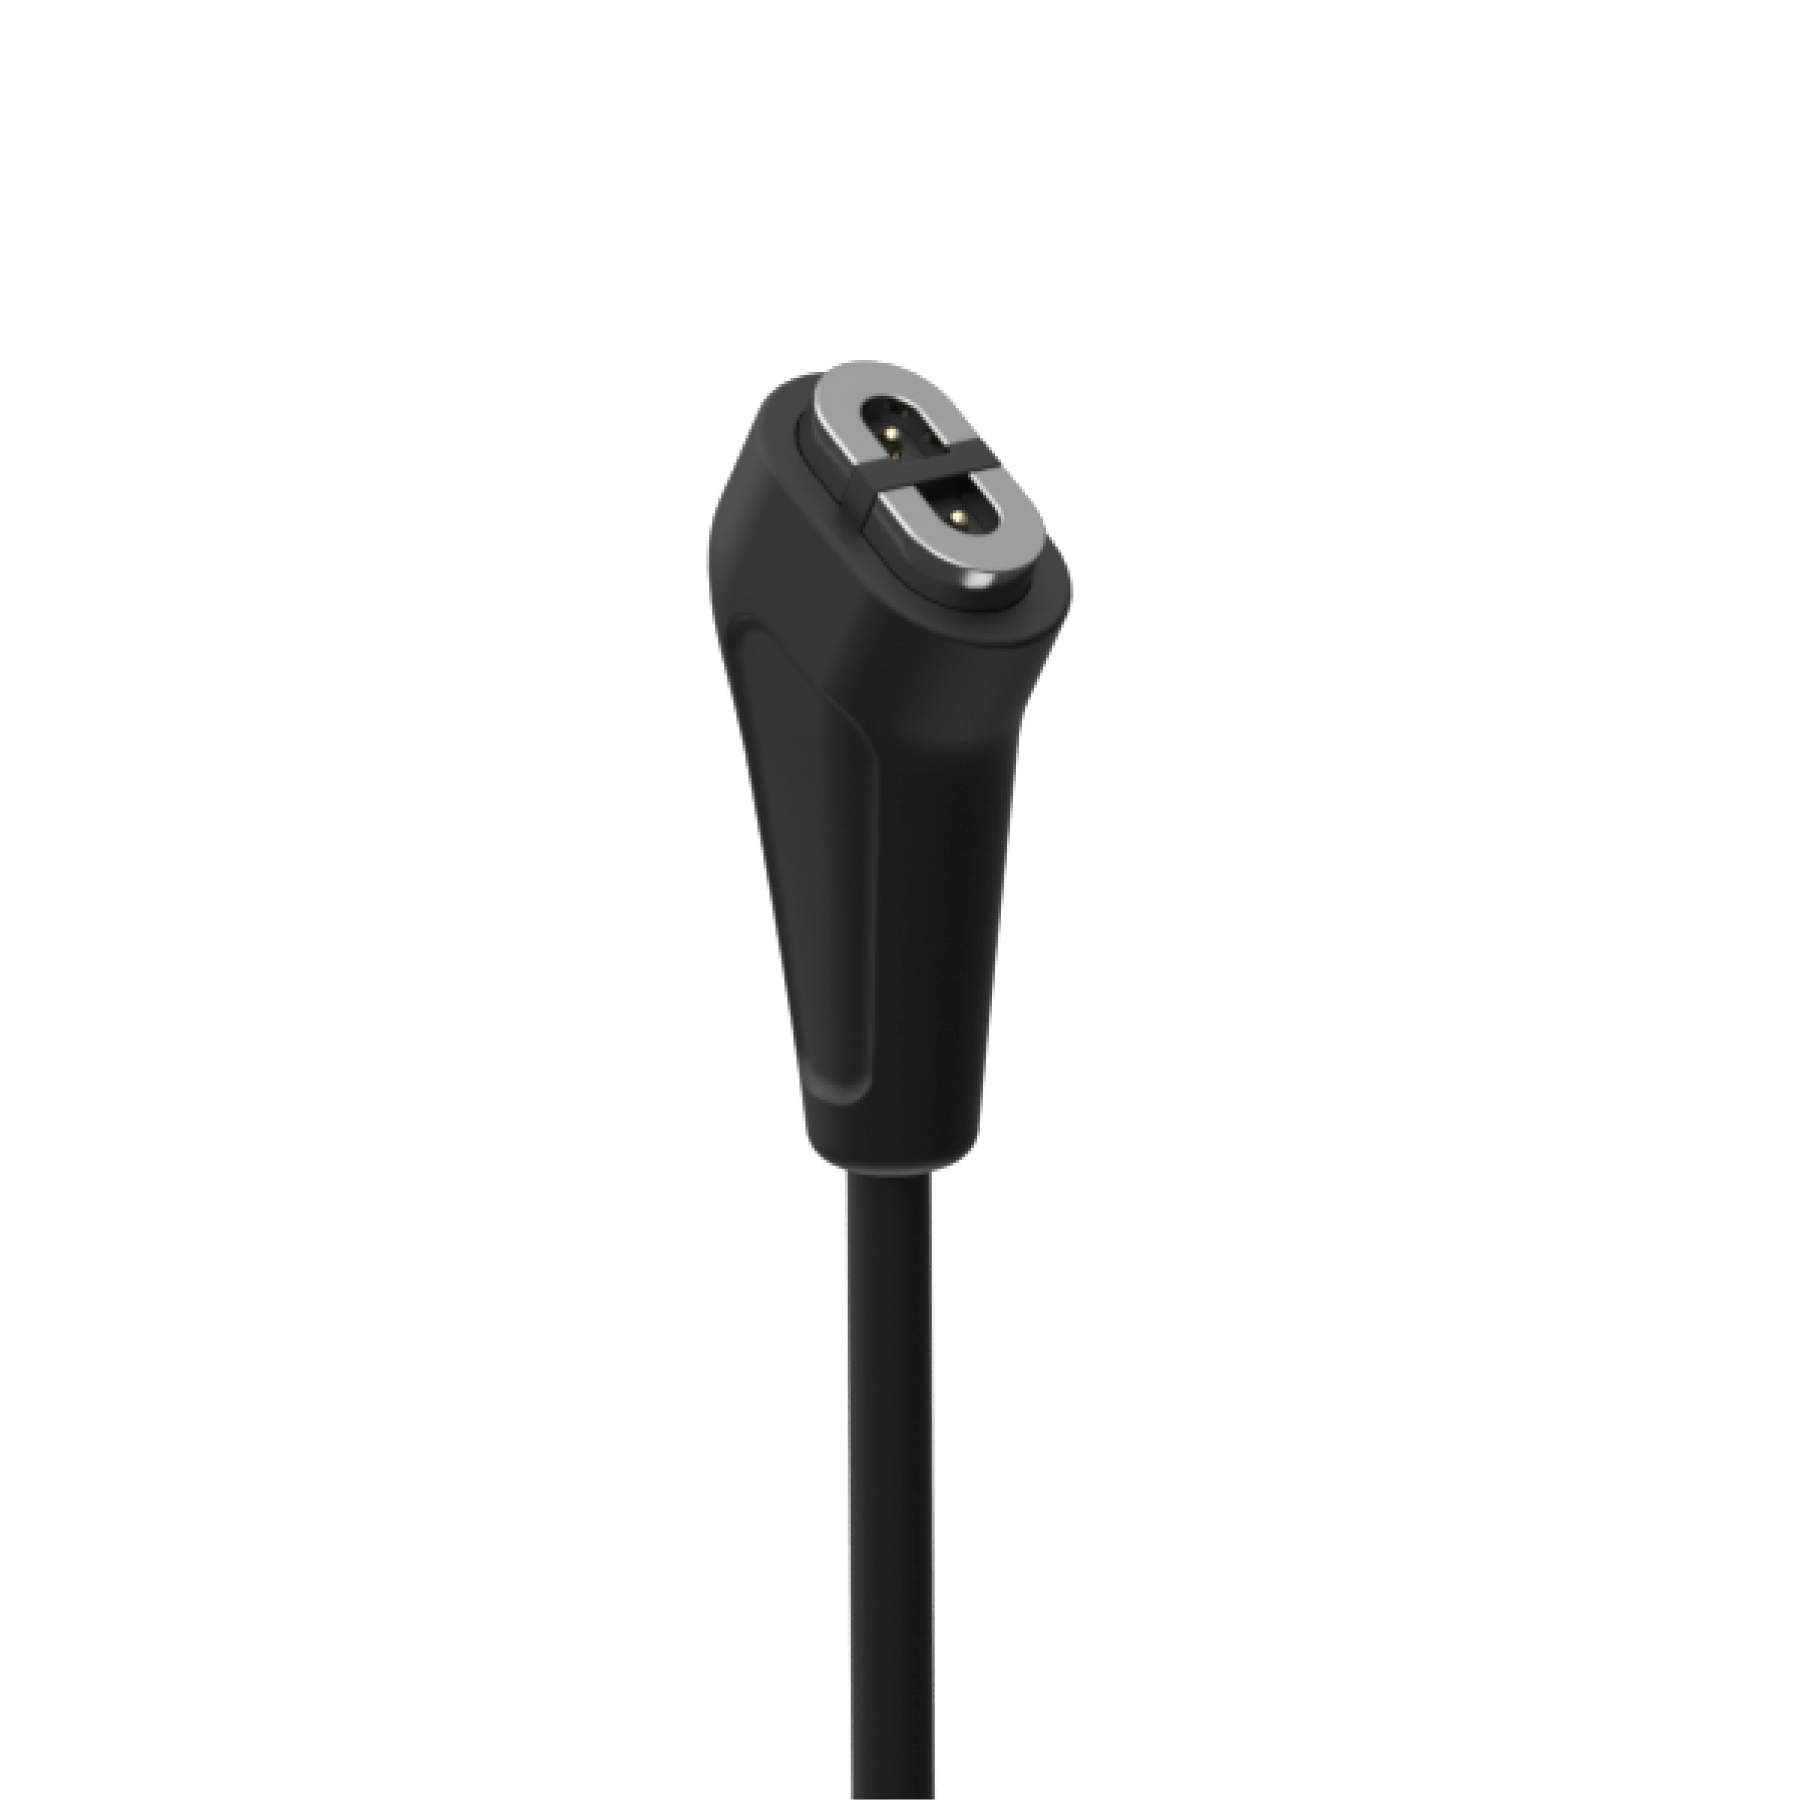 OPENCOMM CHARGING CABLE